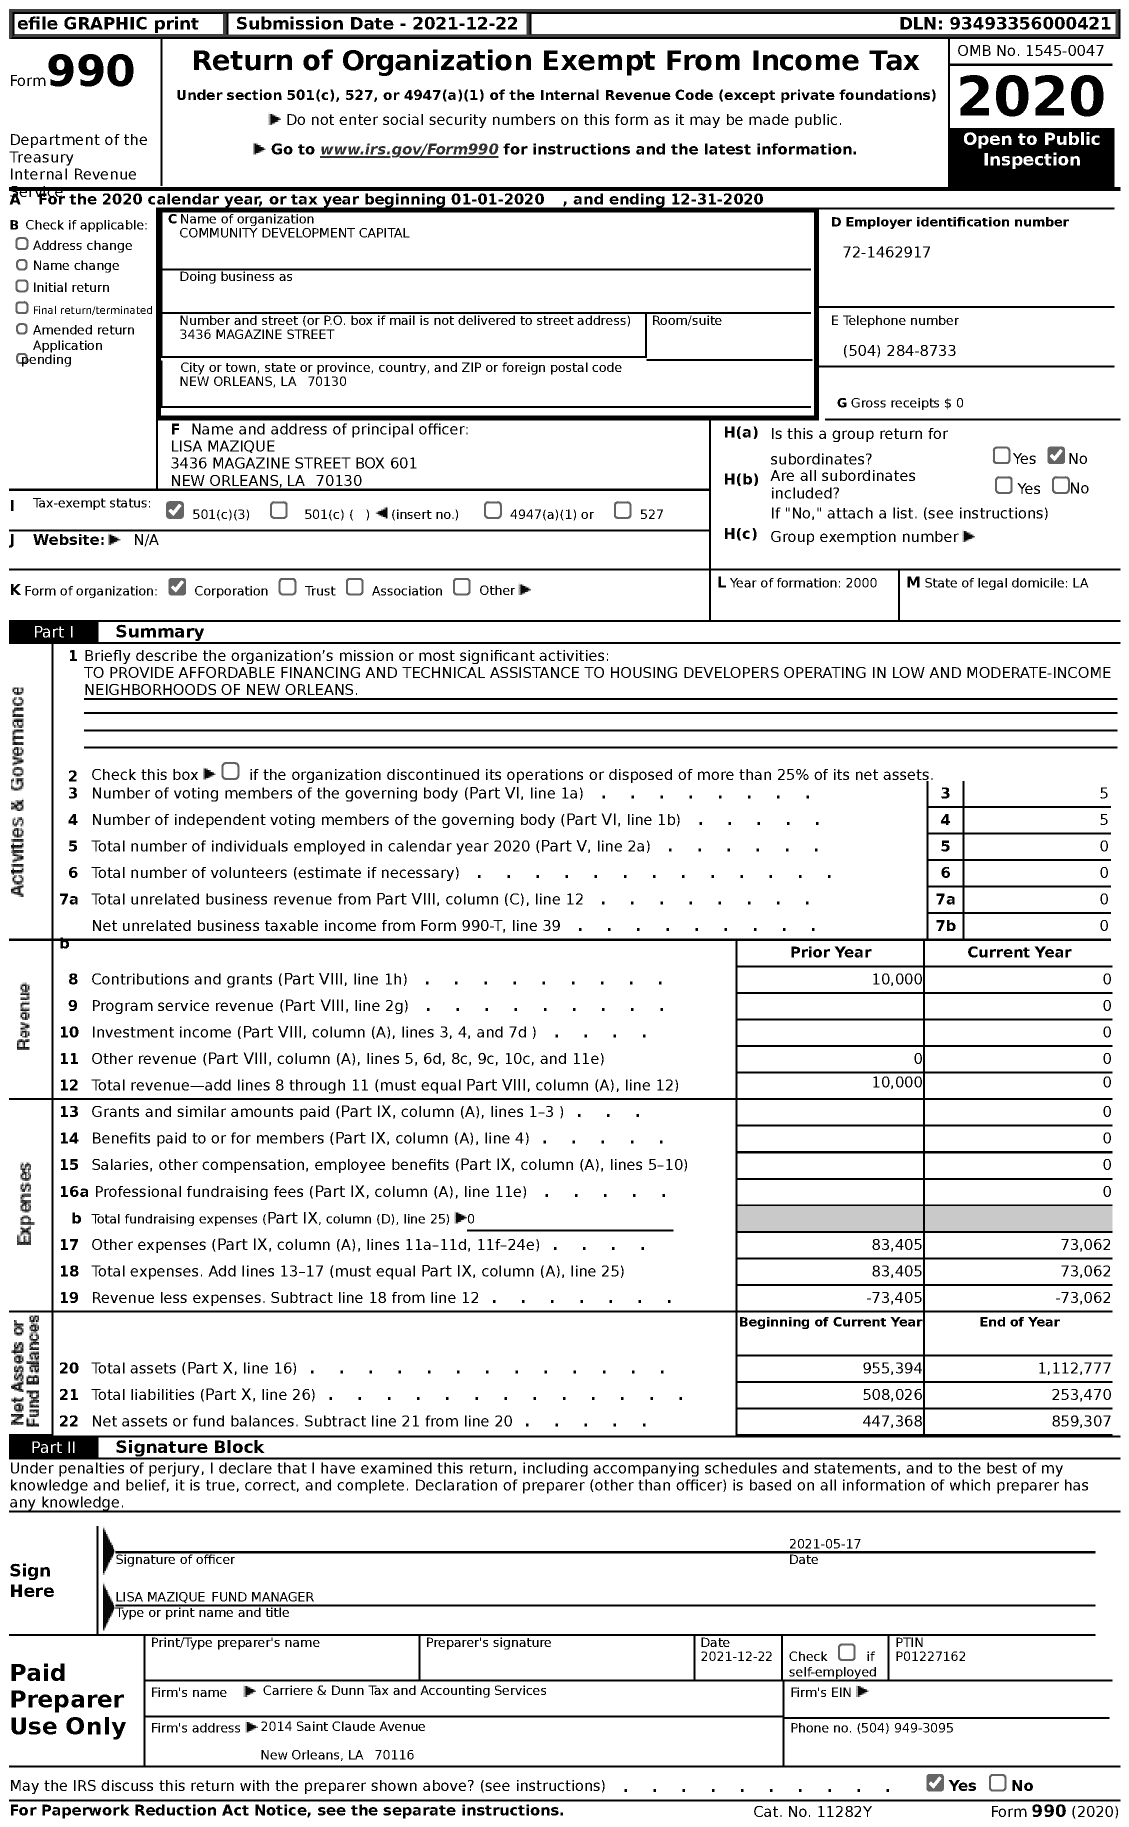 Image of first page of 2020 Form 990 for Community Development Capital